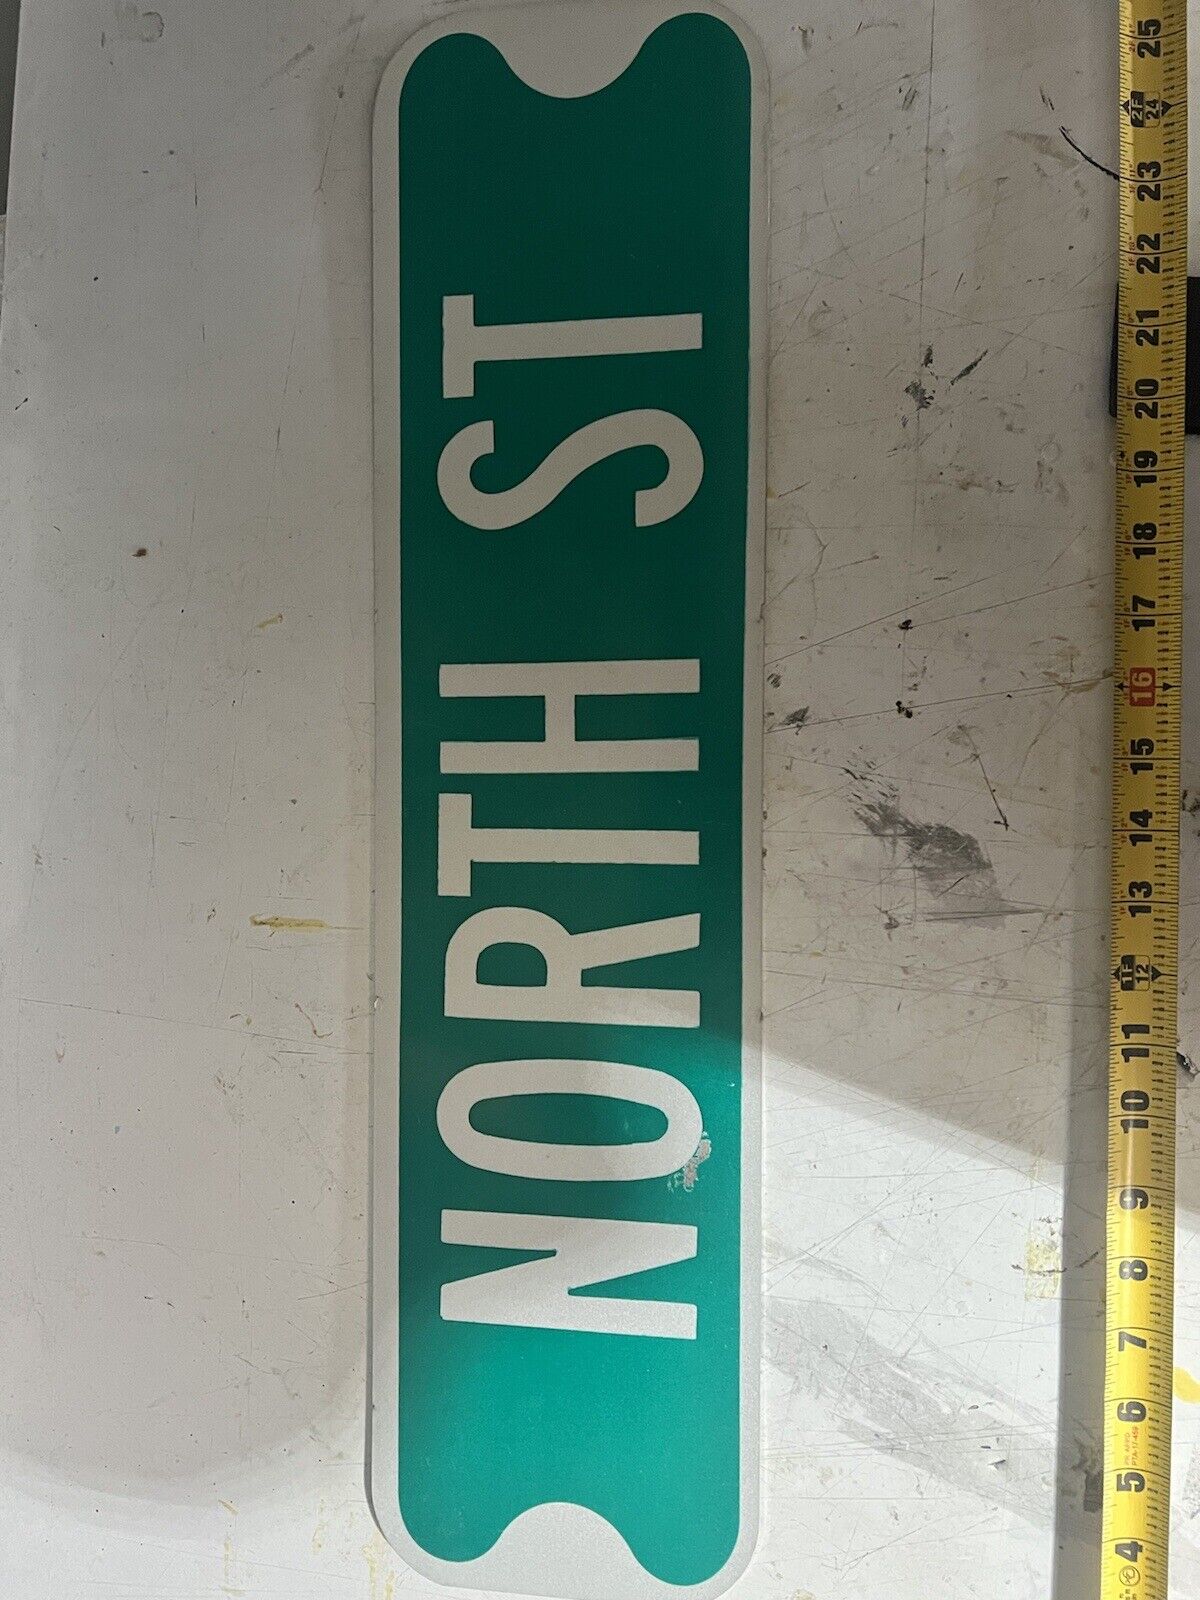 Authentic Vintage North St Street Road Sign 24